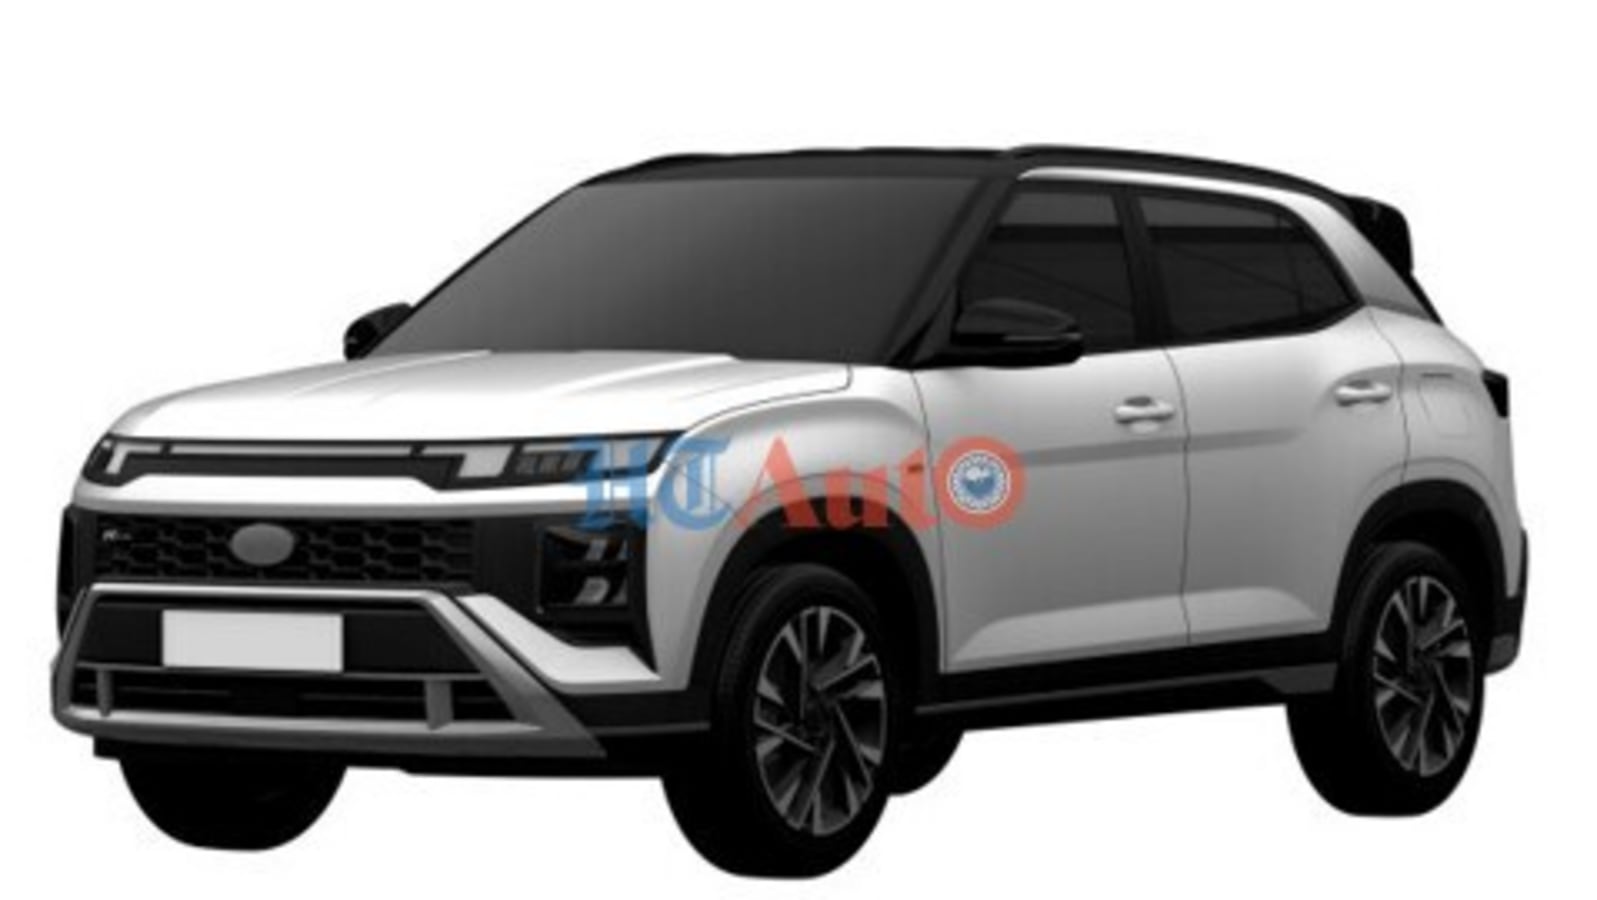 Hyundai Creta N Line ready for launch: All N Line models available in India